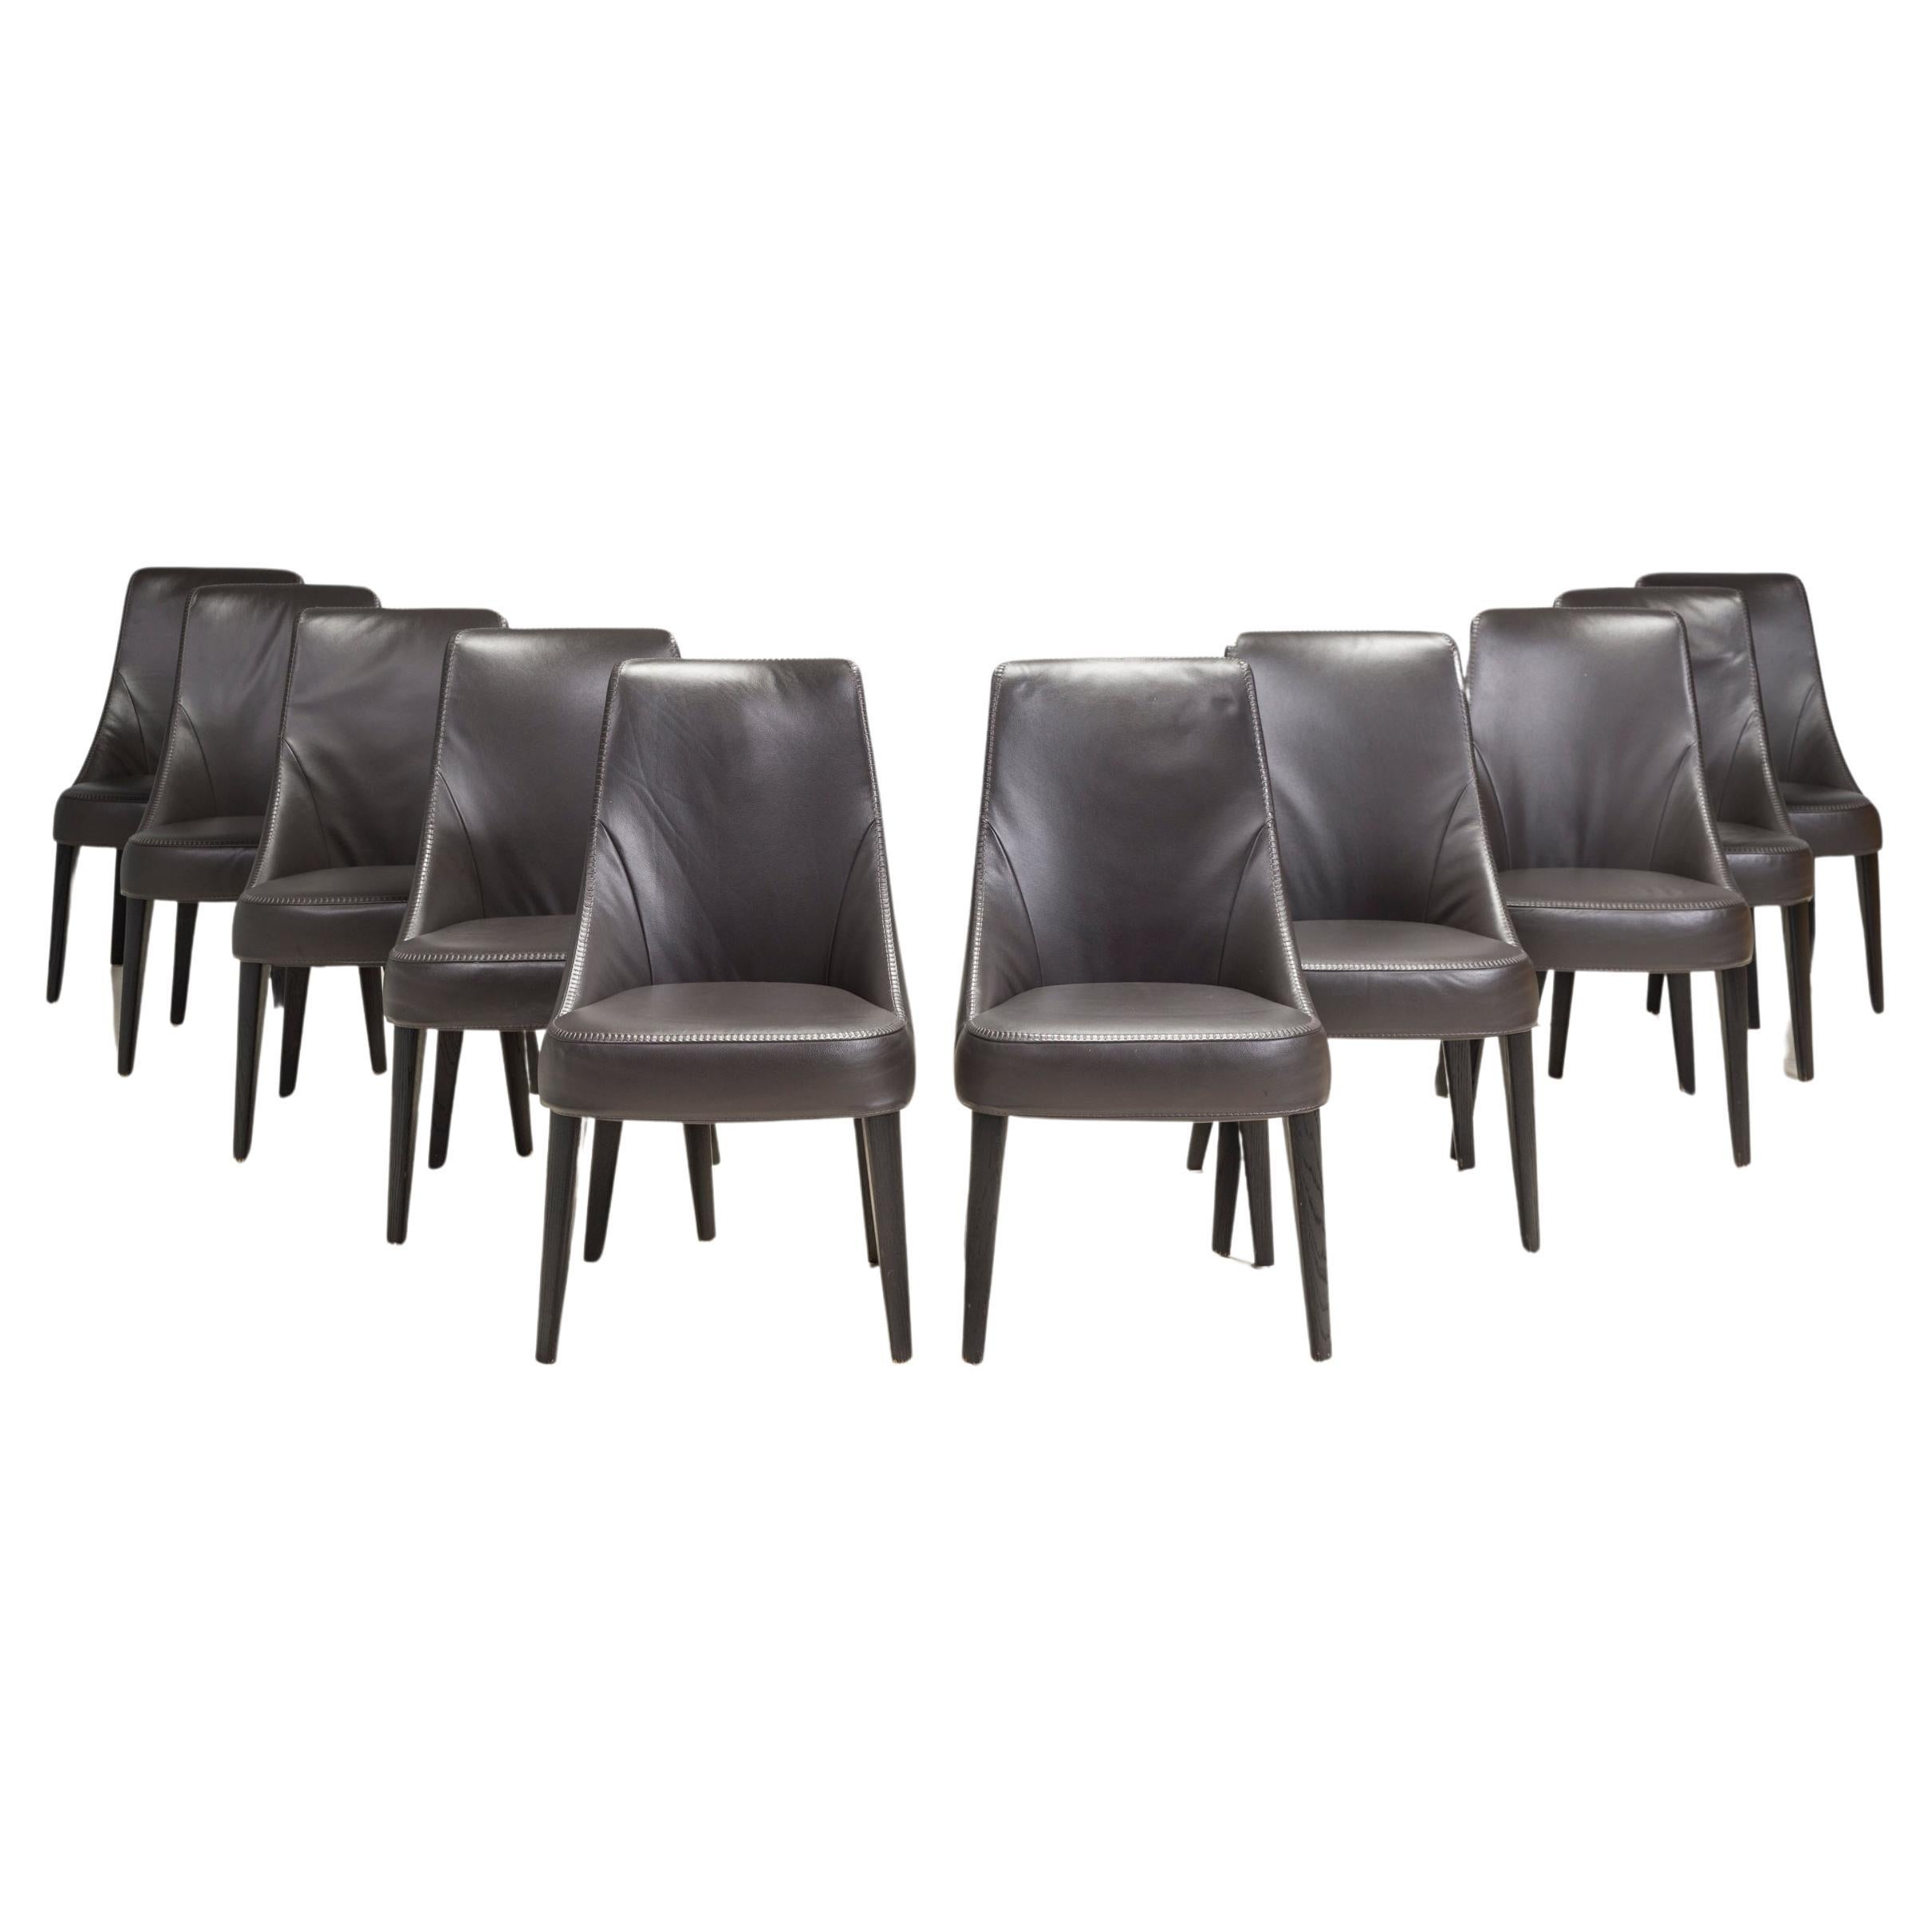 Maxalto by Antonio Citterio Febo Brown Leather Dining Chairs, Set of 10 For Sale